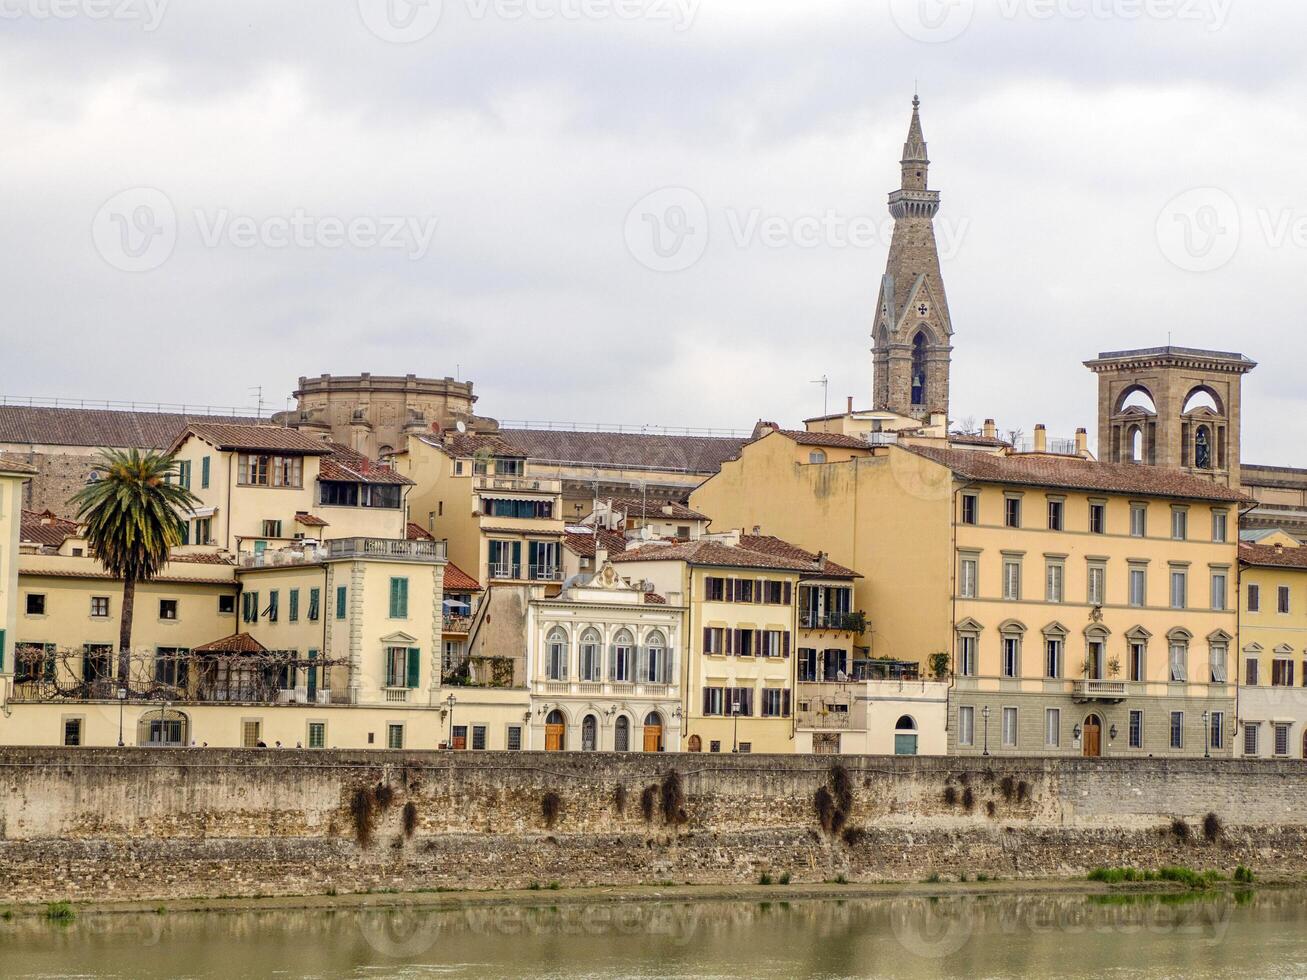 Quai of arno river old buildings florence italy photo